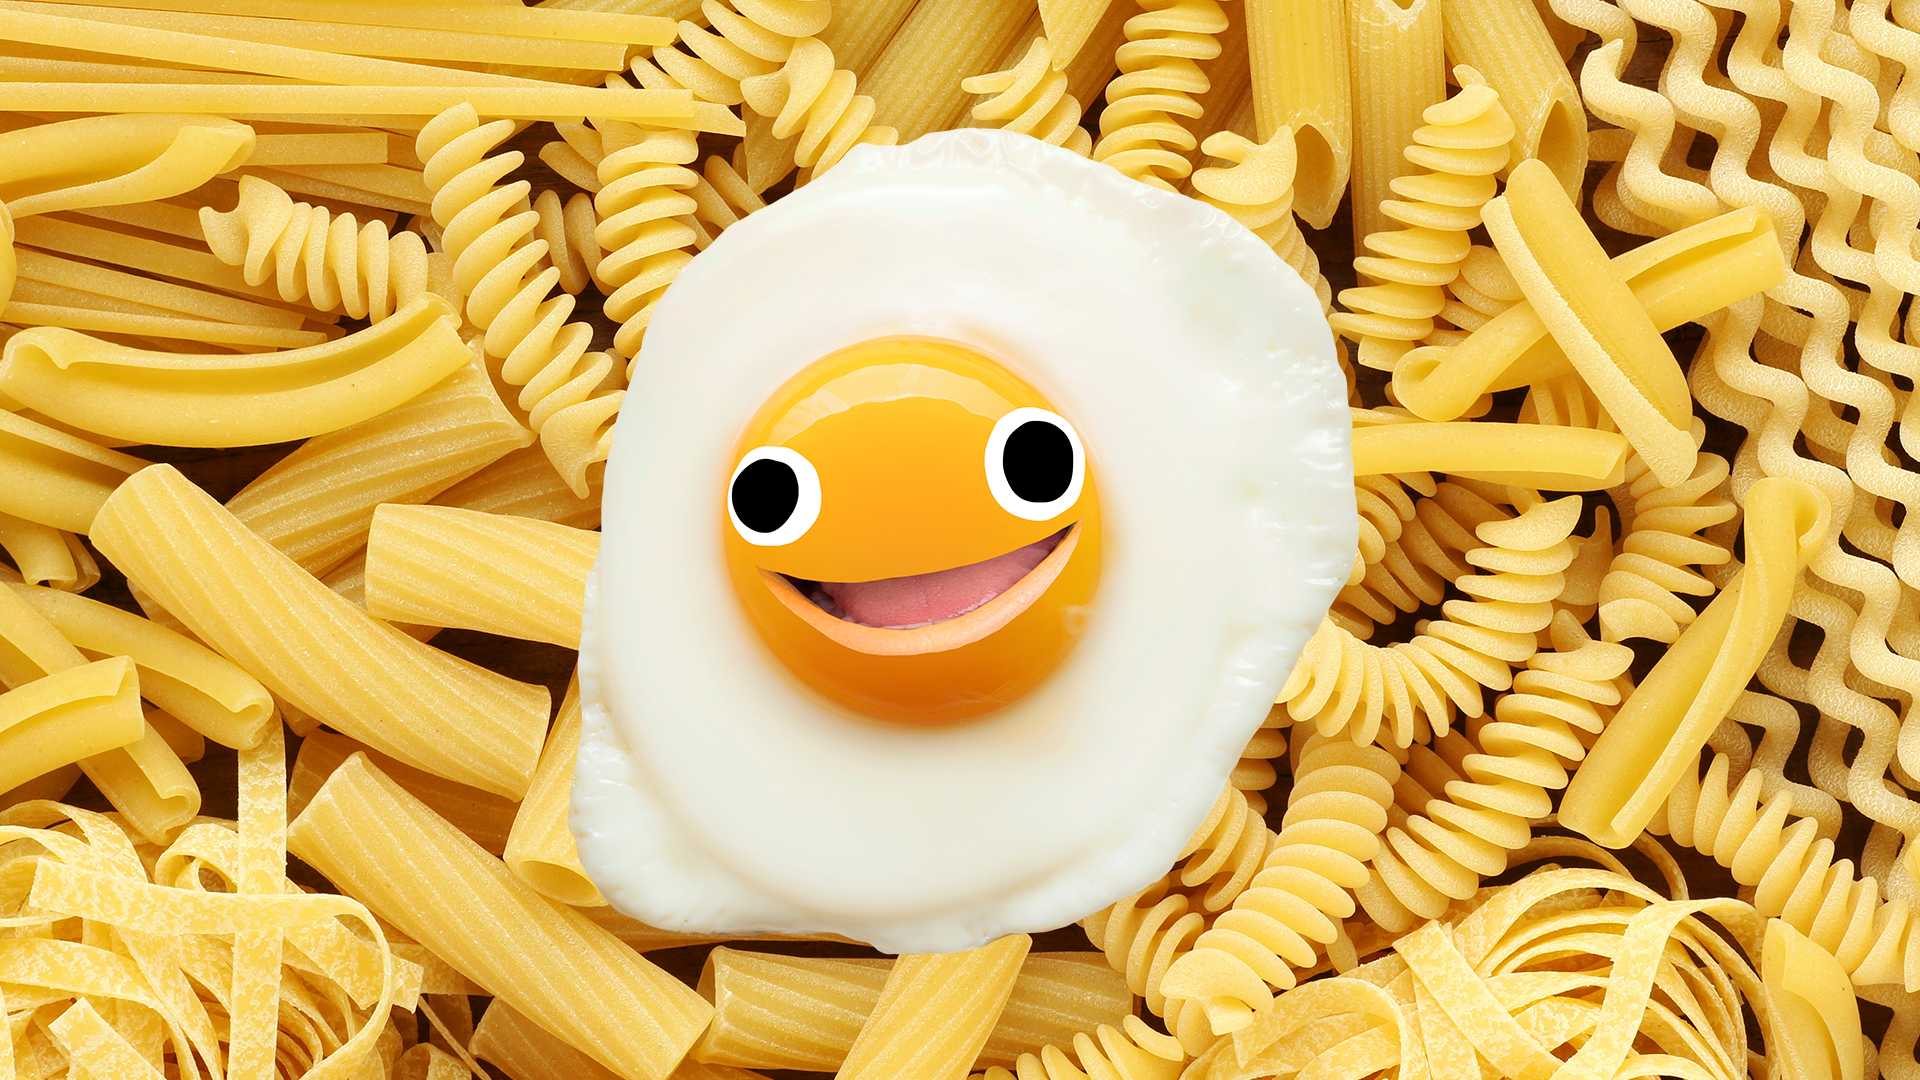 Pasta shapes and goofy fried egg